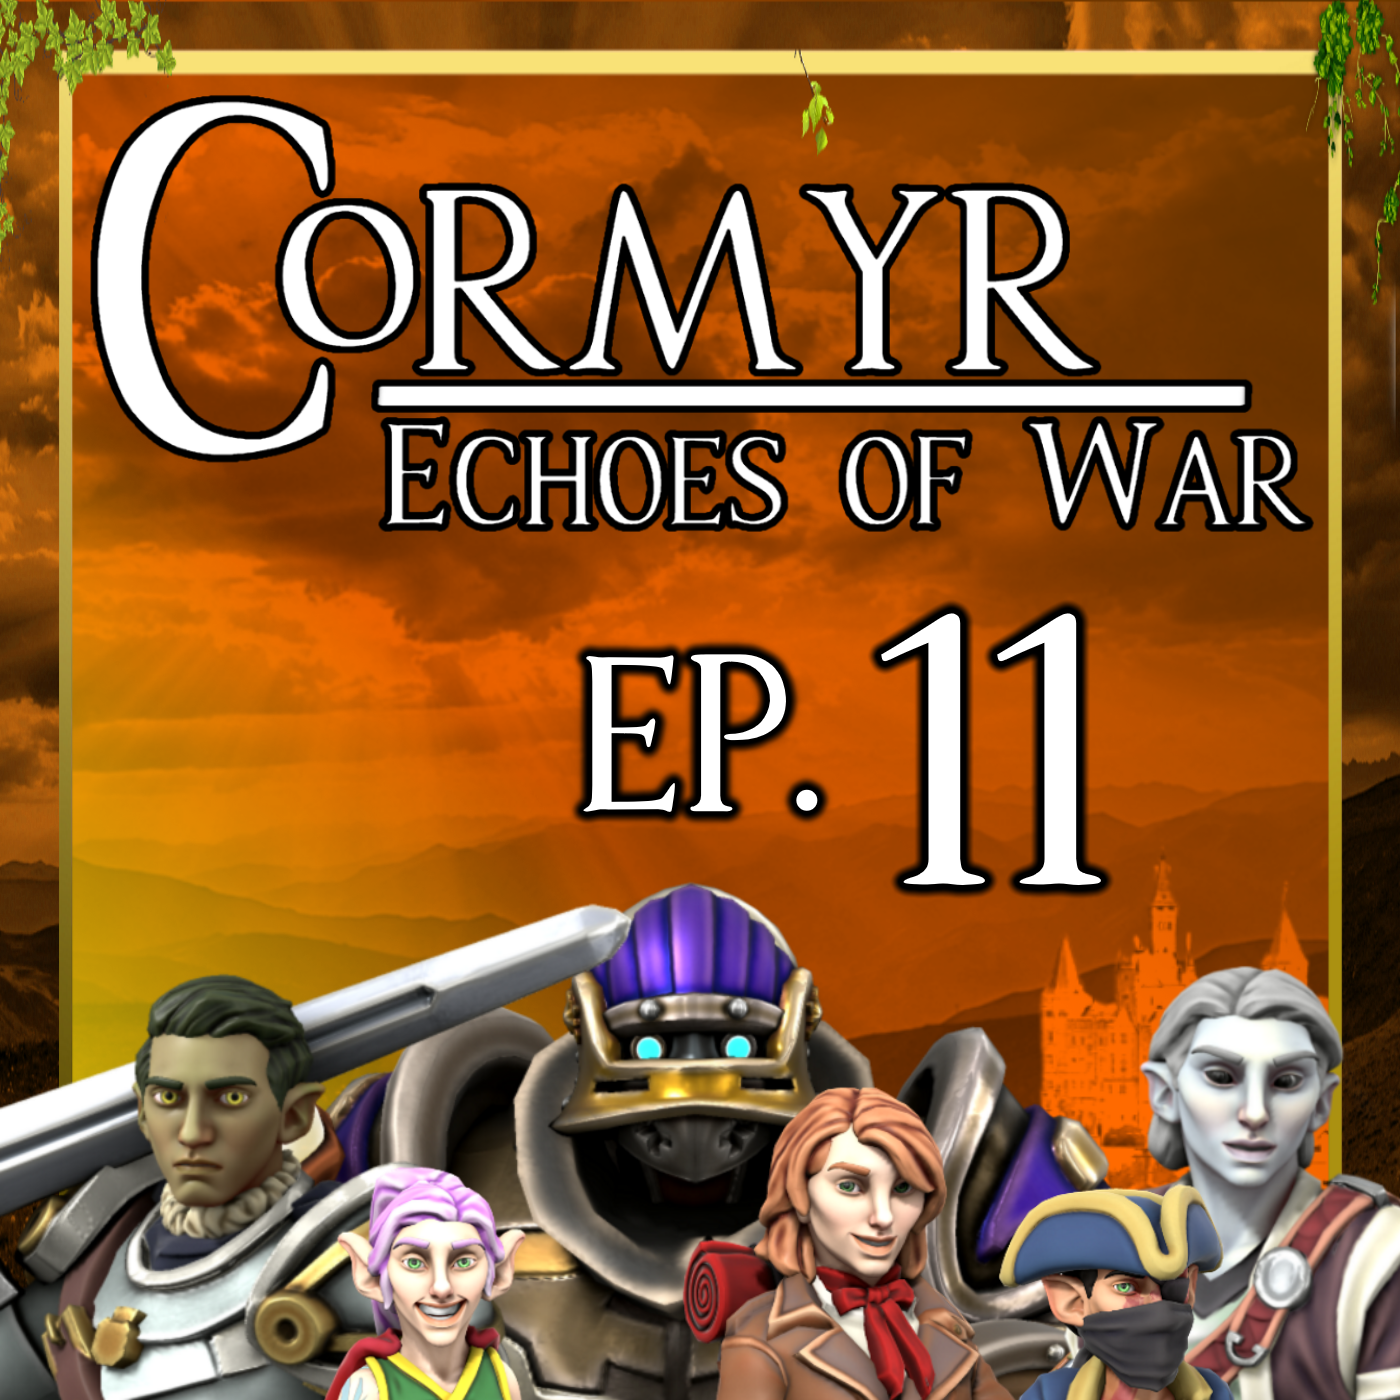 Cormyr: Echoes of War - Ep. 11 - Keep Your Friends Close